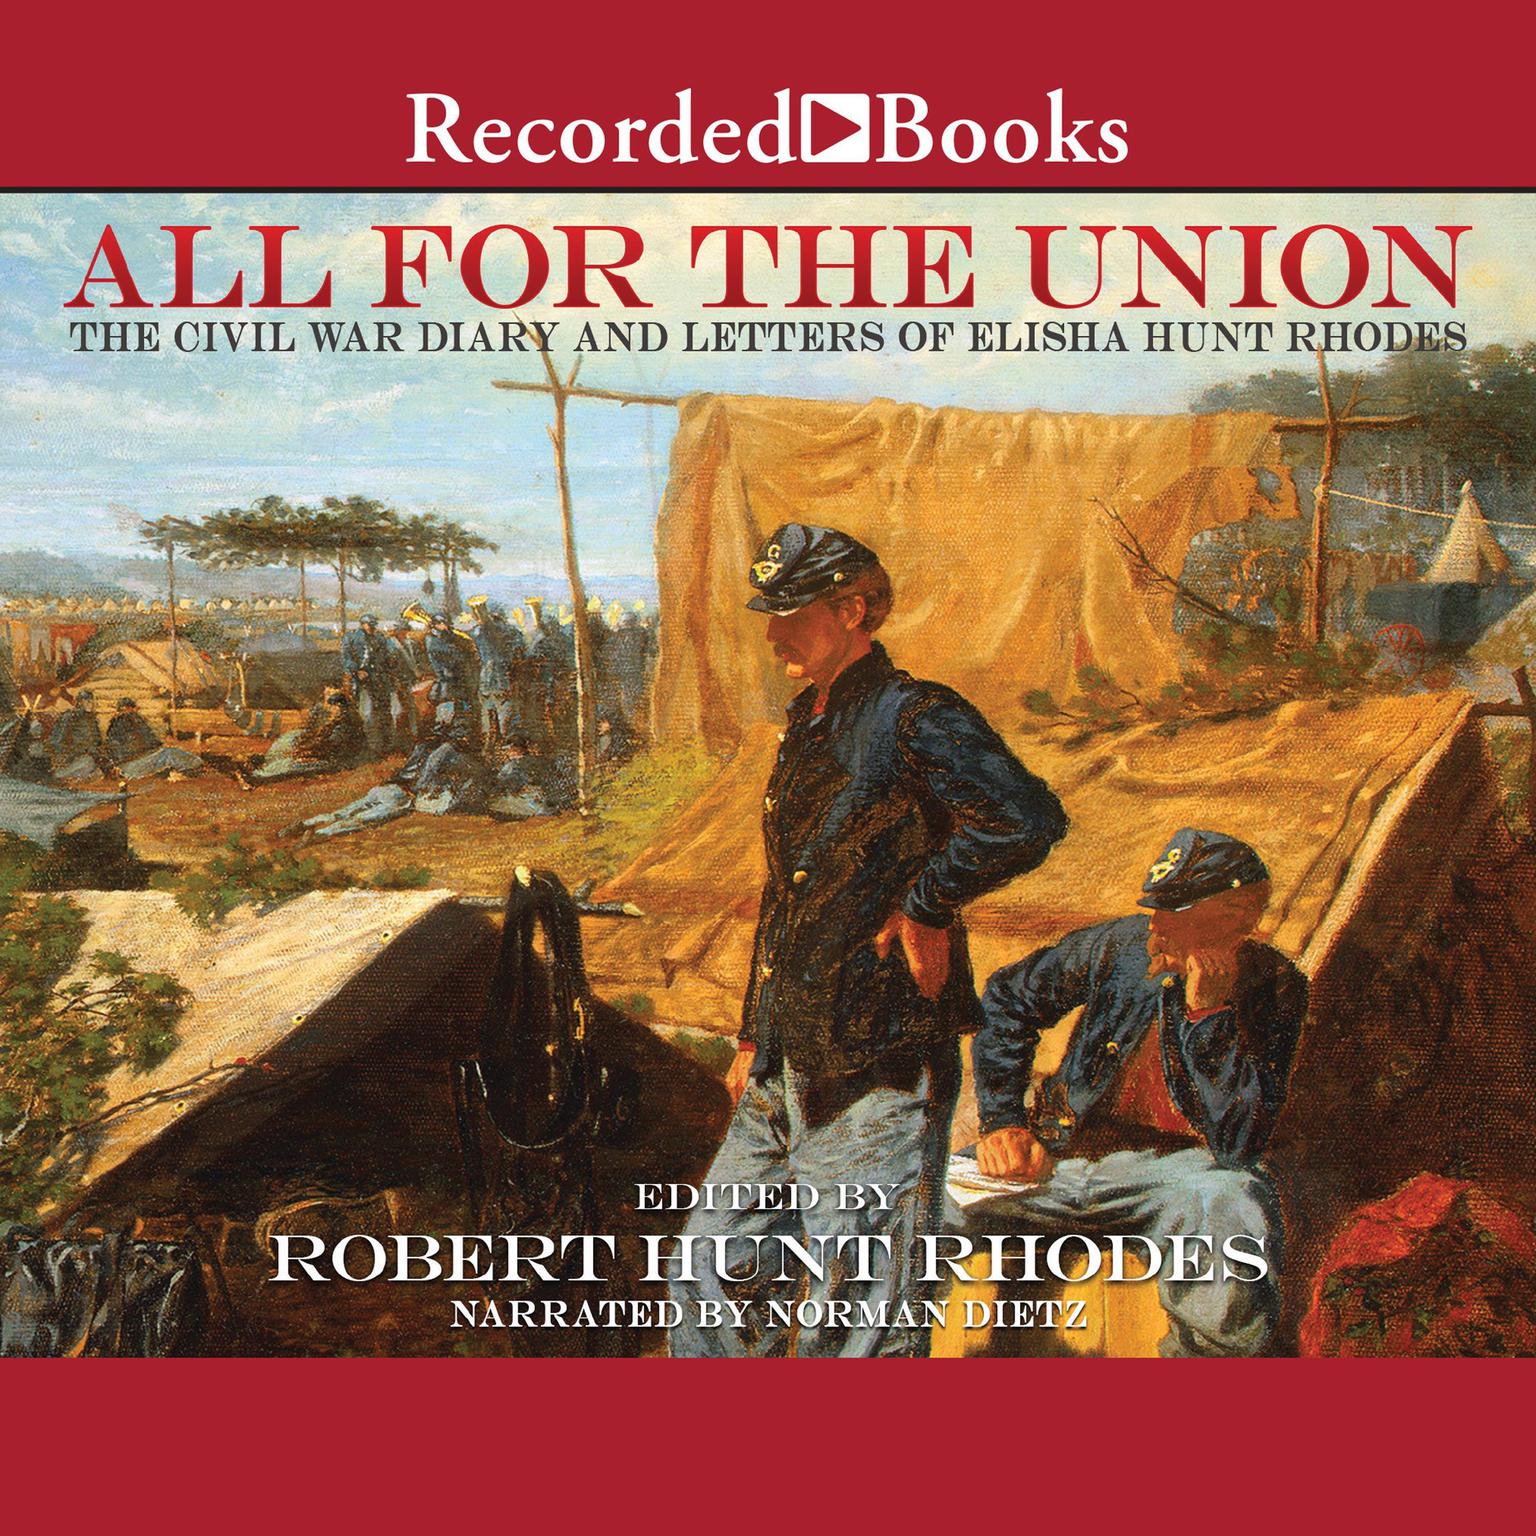 All For the Union: The Civil War Diary and Letters of Elisha Hunt Rhodes Audiobook, by Elisha Hunt Rhodes